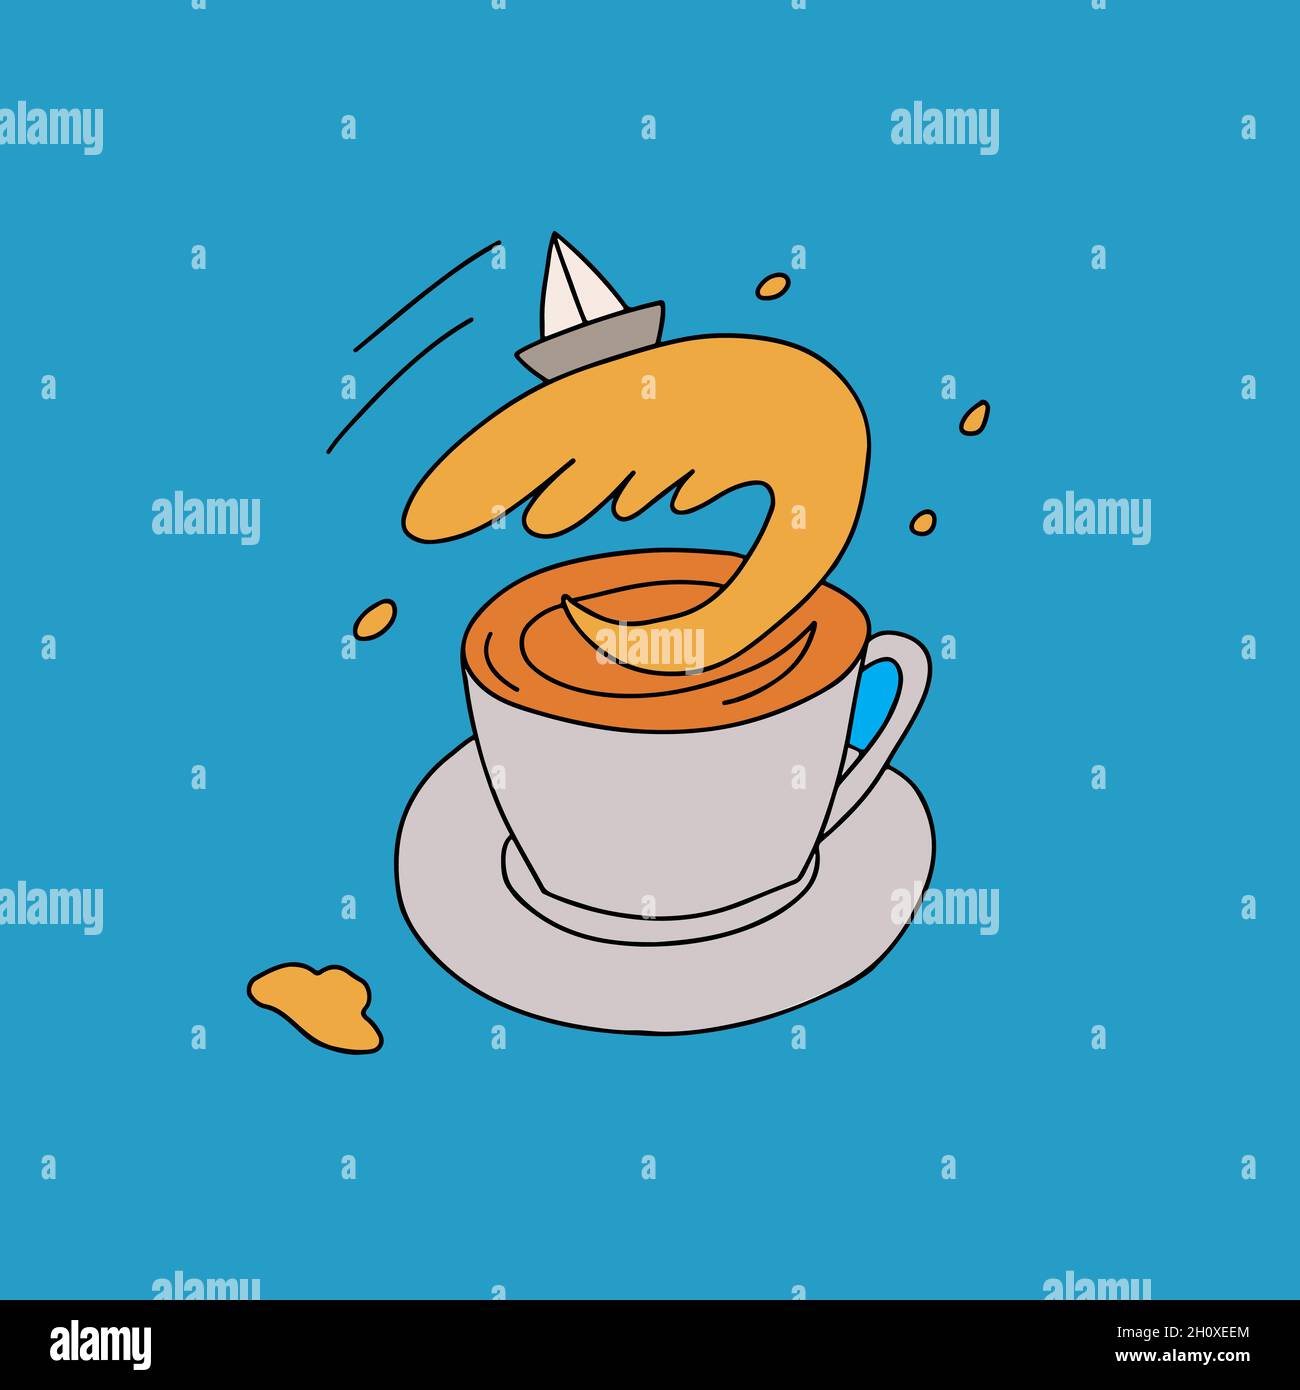 Storm in a teacup. Metaphoric idiom. Teacup, wave and ship. Stock Vector